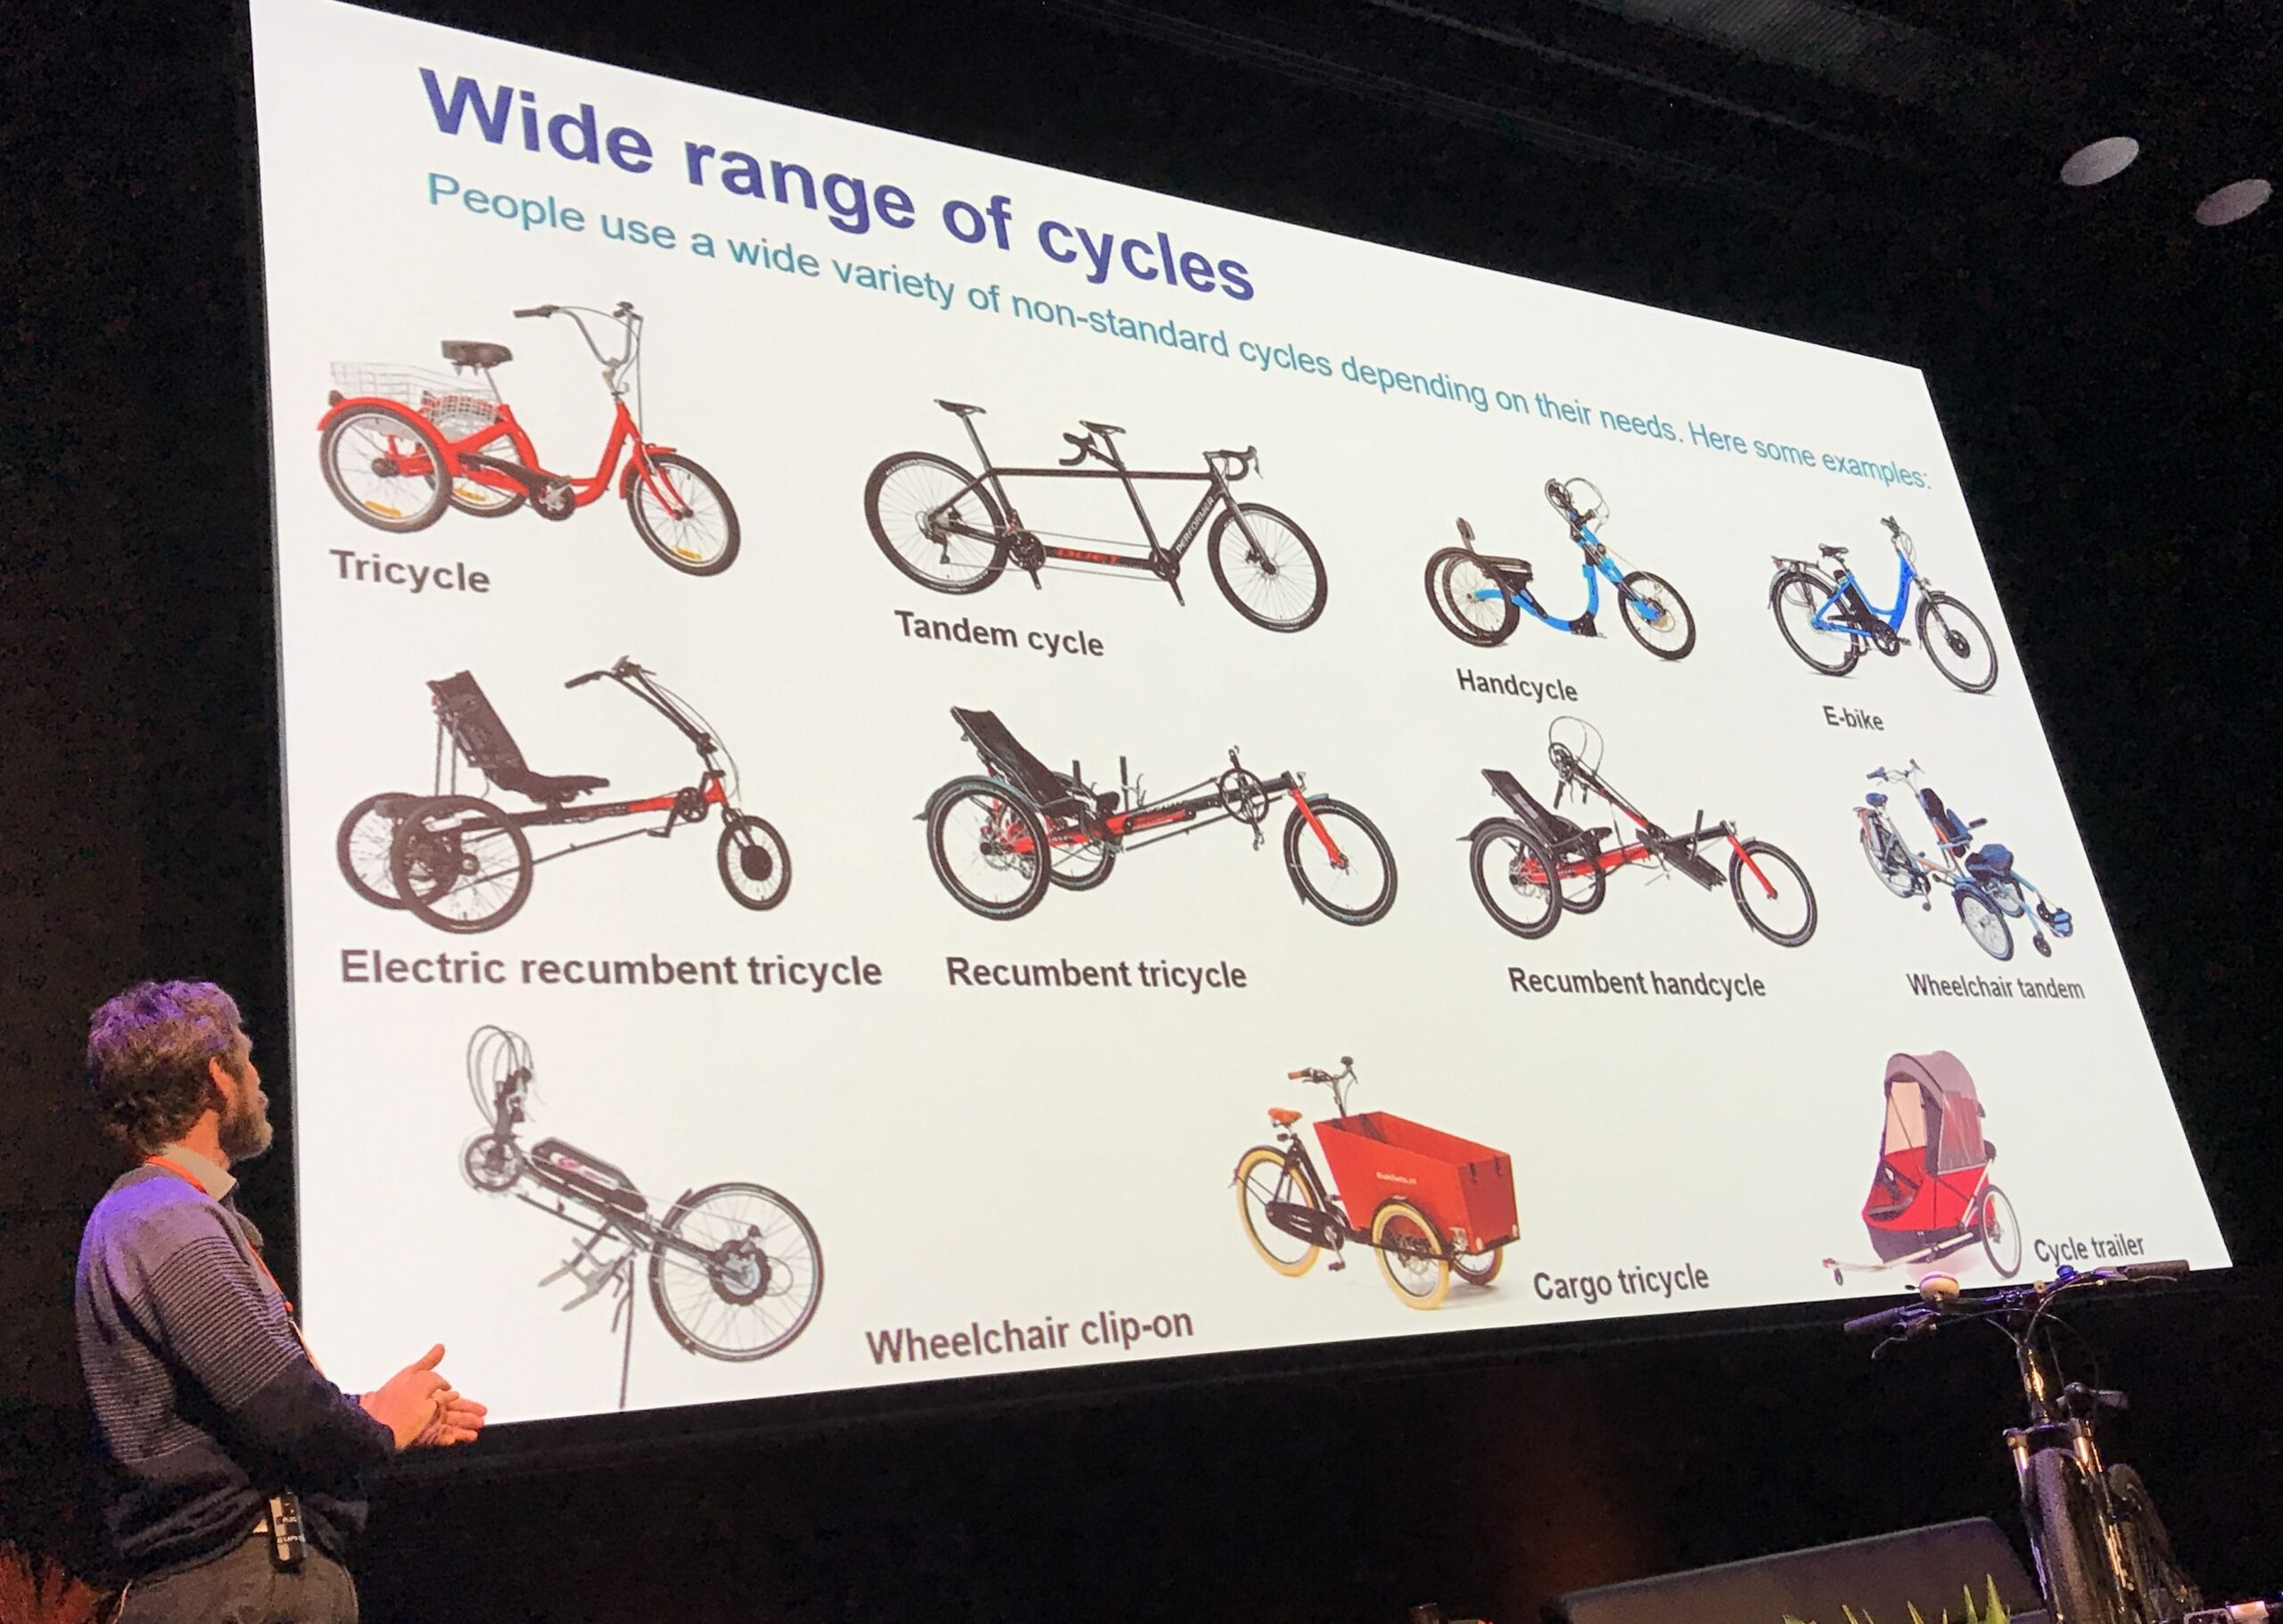 Simon Kennett presenting. The slides behind him show images of a range of bike types, including trike, tandem cycle, handcycle, recumbent cycles, wheelchair clip on and wheelchair tandem.